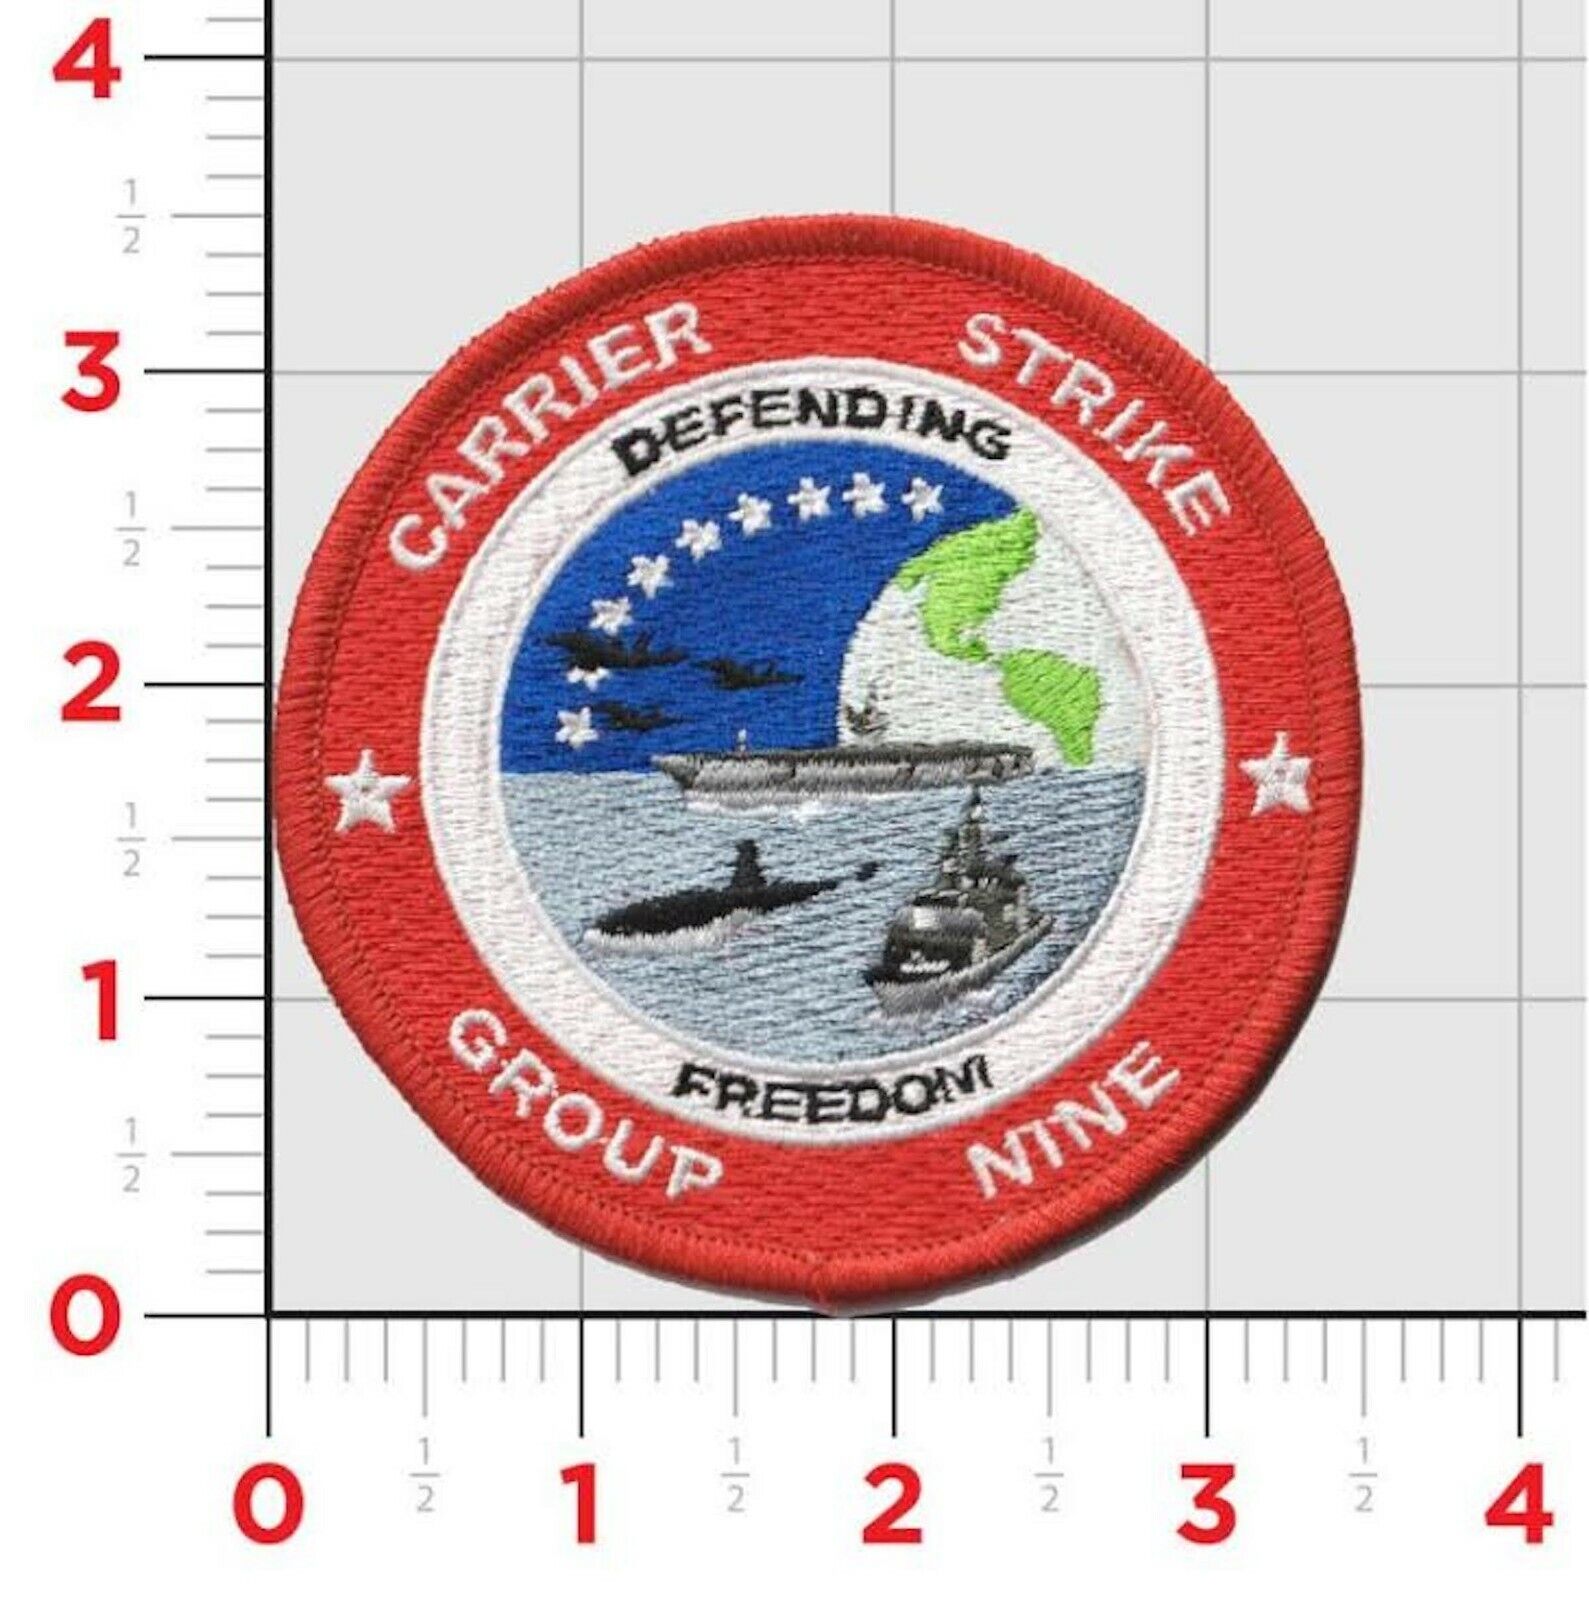 NAVY CARRIER STRIKE GROUP 9 NAVAL SHIP DEFENDING FREEDOM ROUND EMBROIDERED PATCH